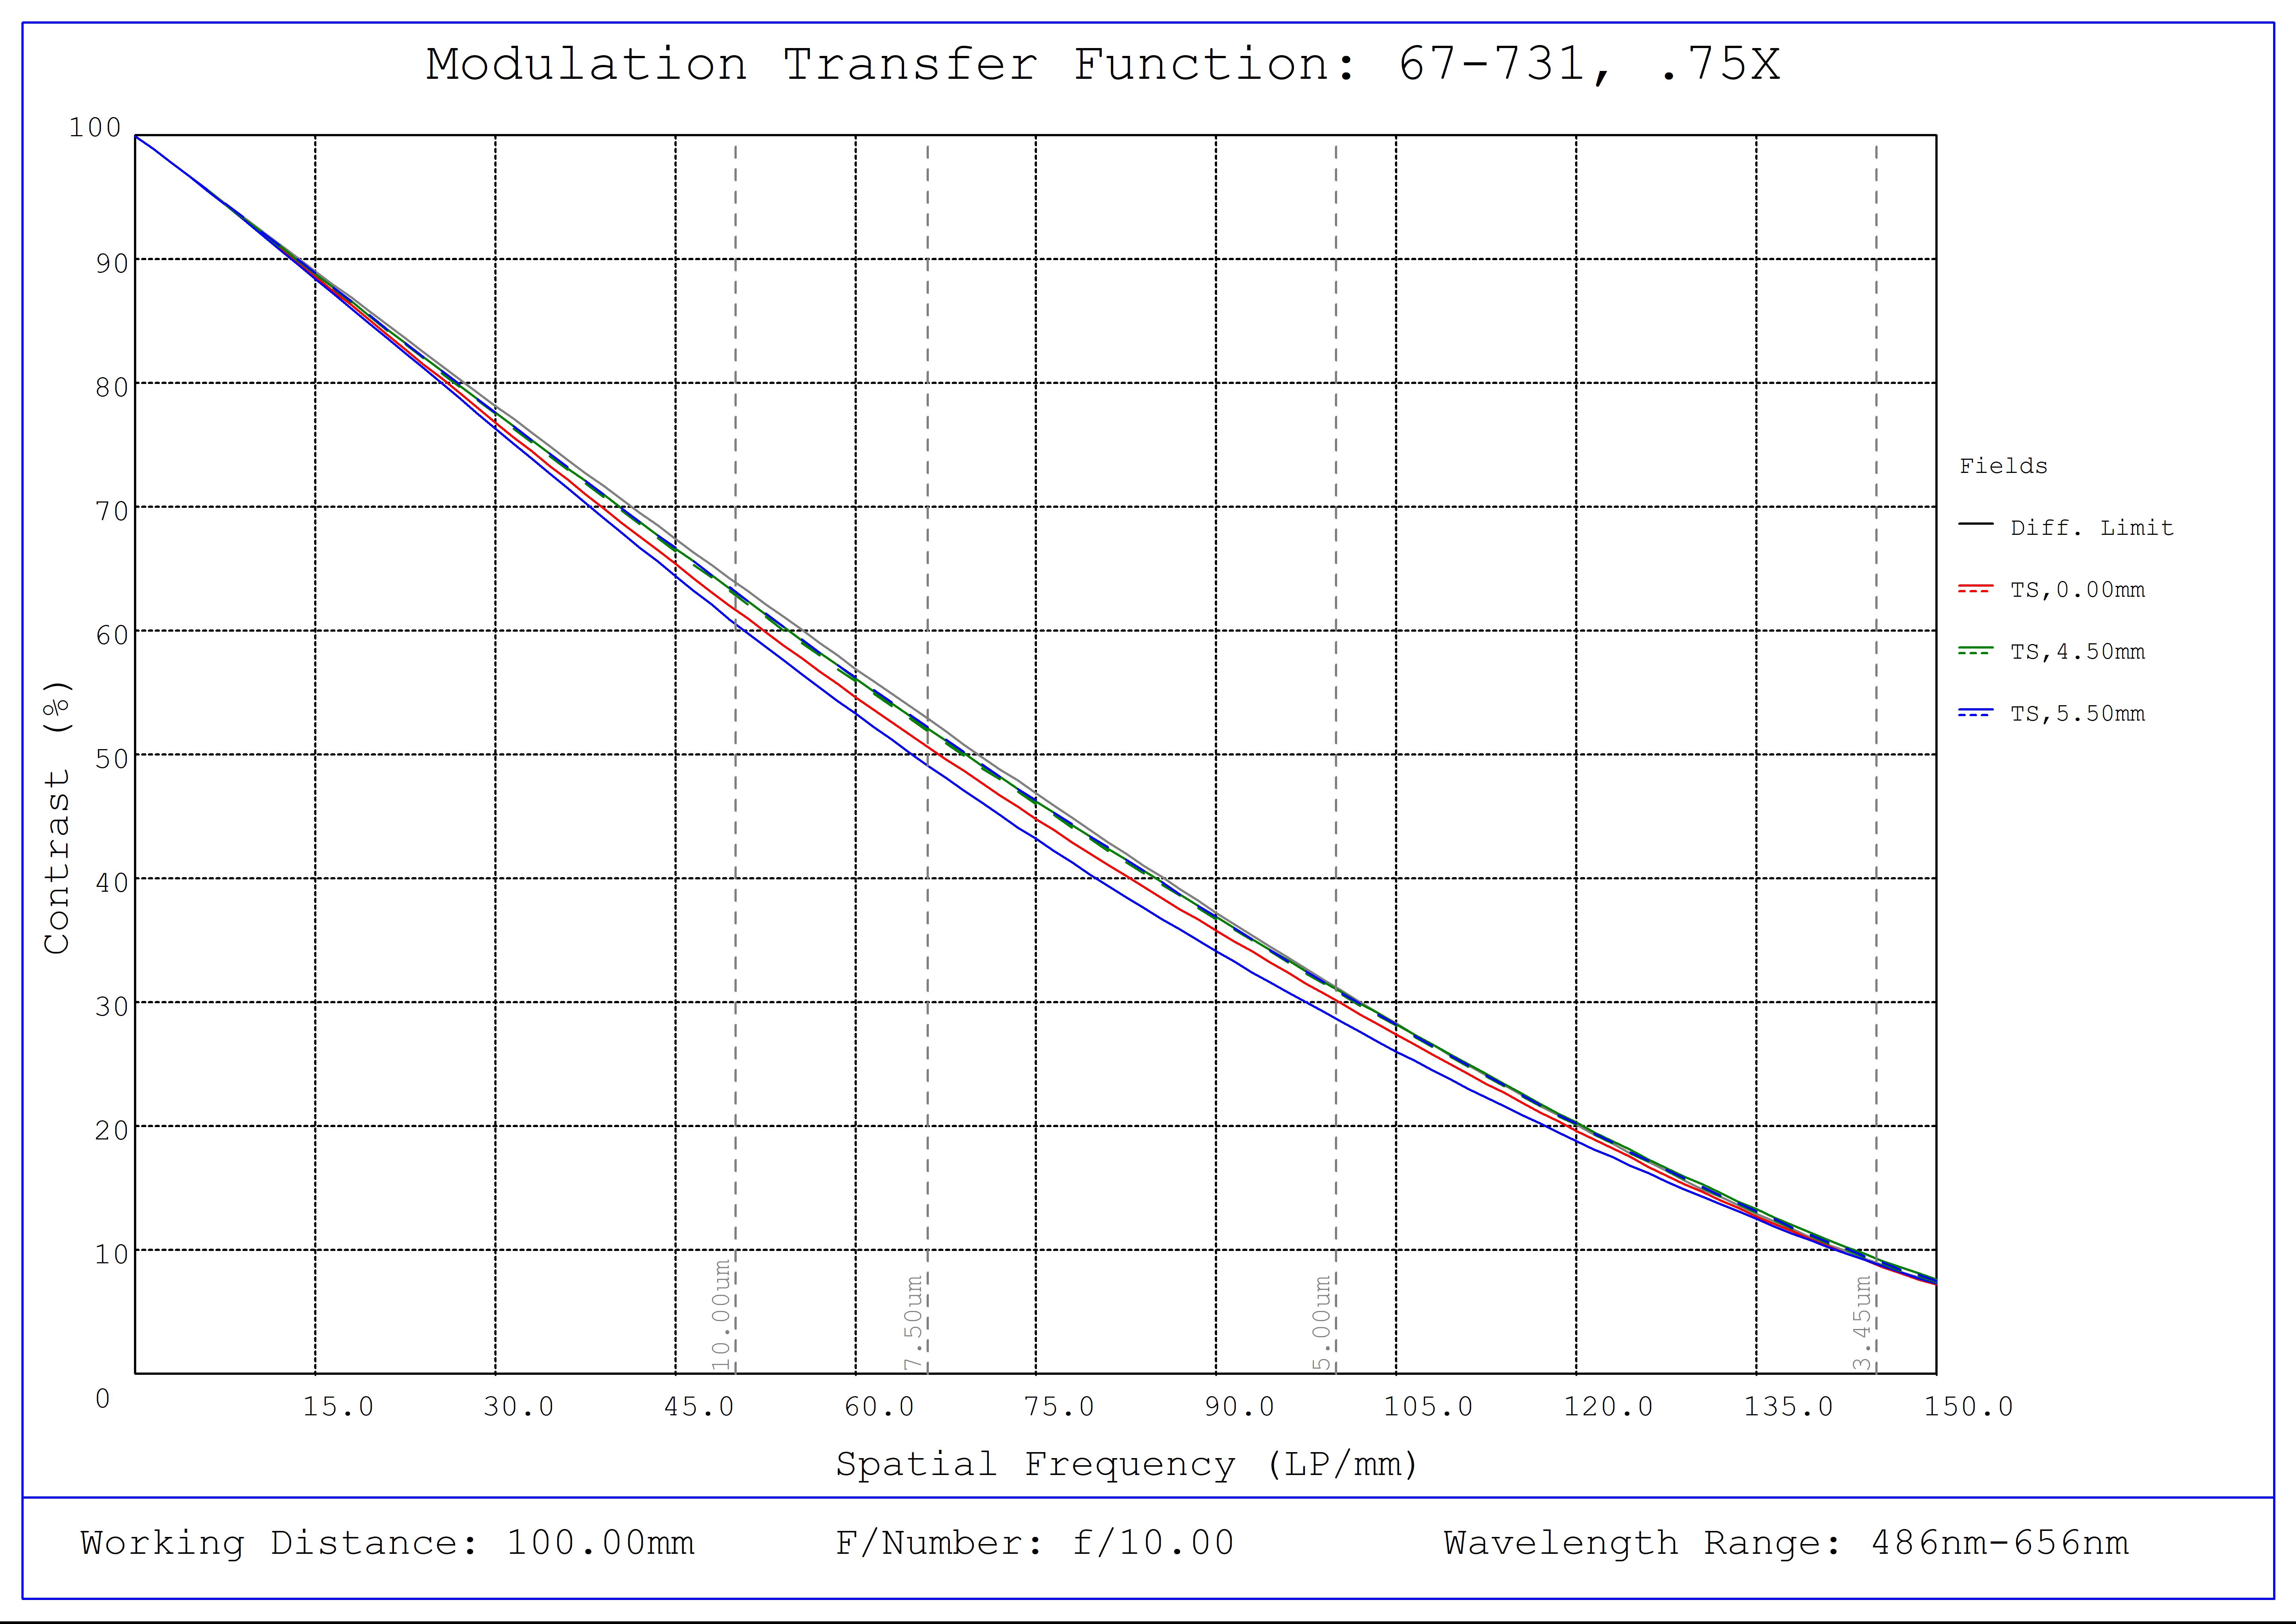 #67-731, 0.75X SilverTL™ Telecentric Lens, Modulated Transfer Function (MTF) Plot, 100mm Working Distance, f10